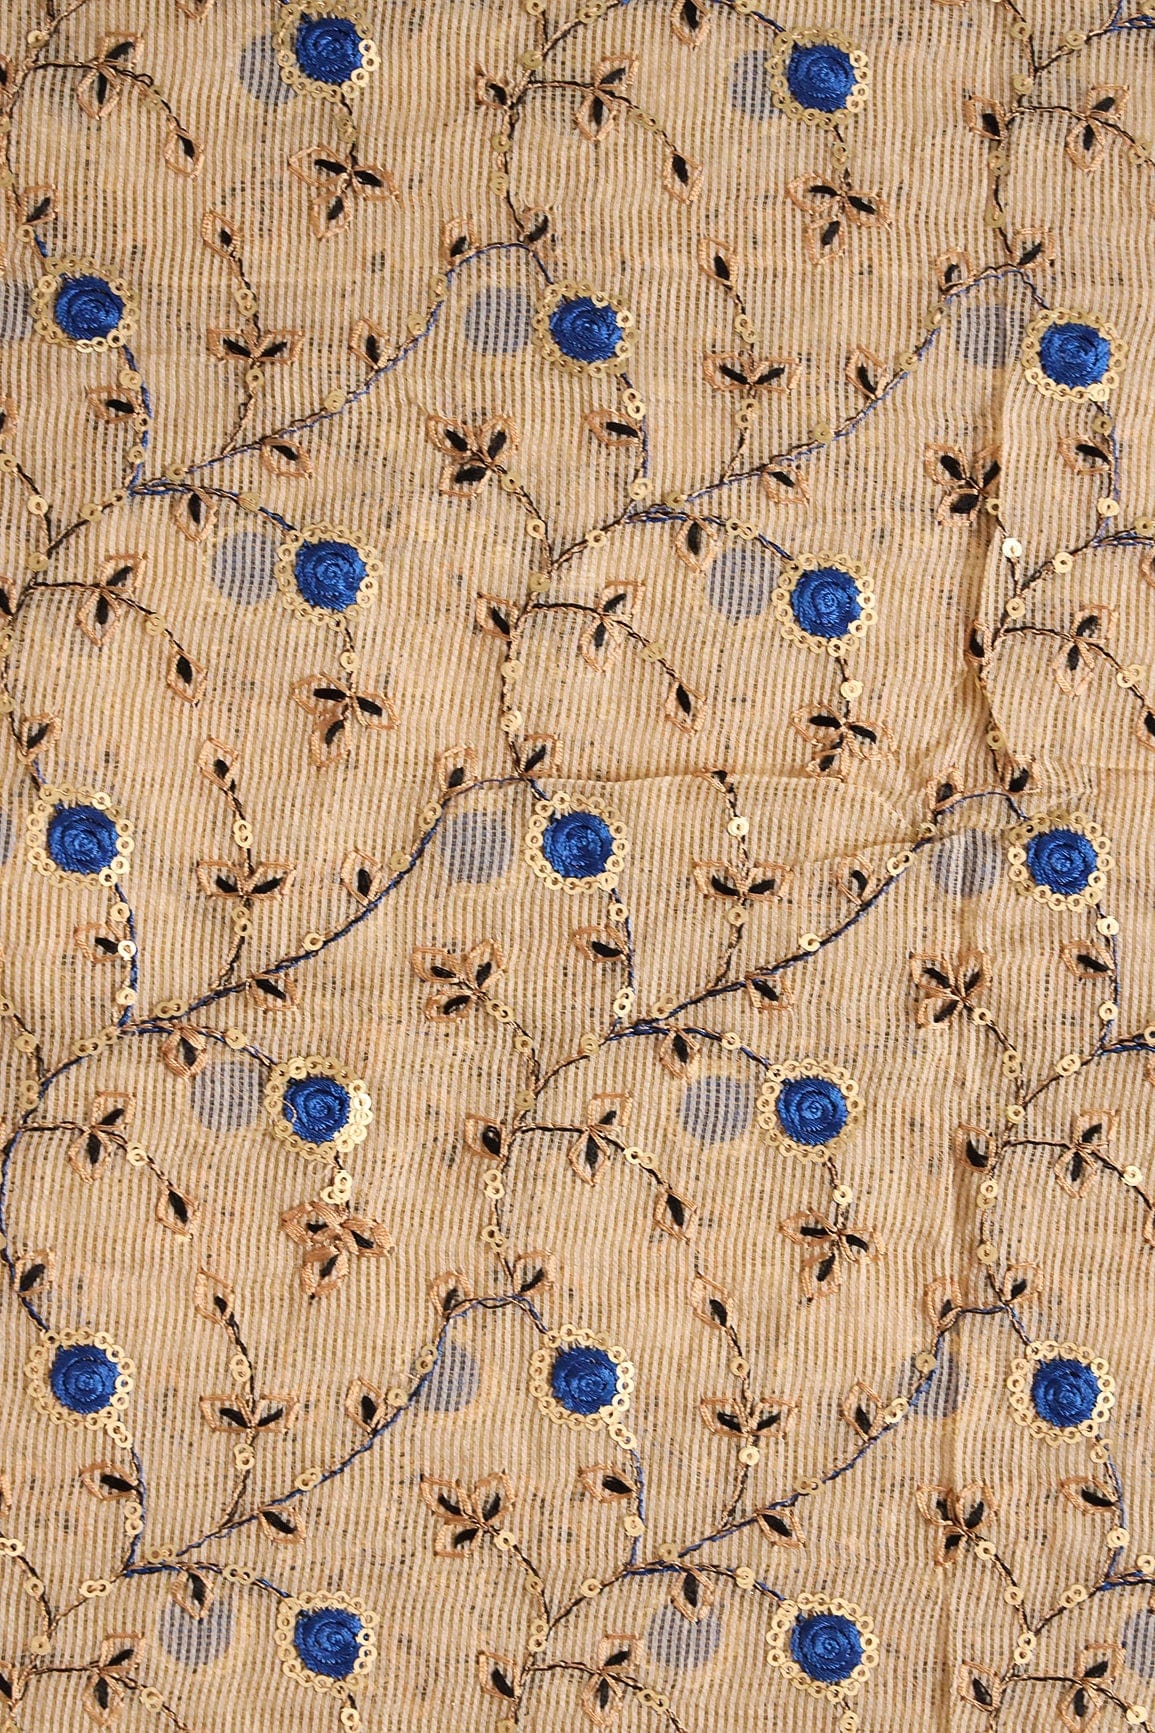 doeraa Embroidery Fabrics Gold Sequins With Royal Blue Thread Floral Embroidery On Beige Kota Doria Net Fabric